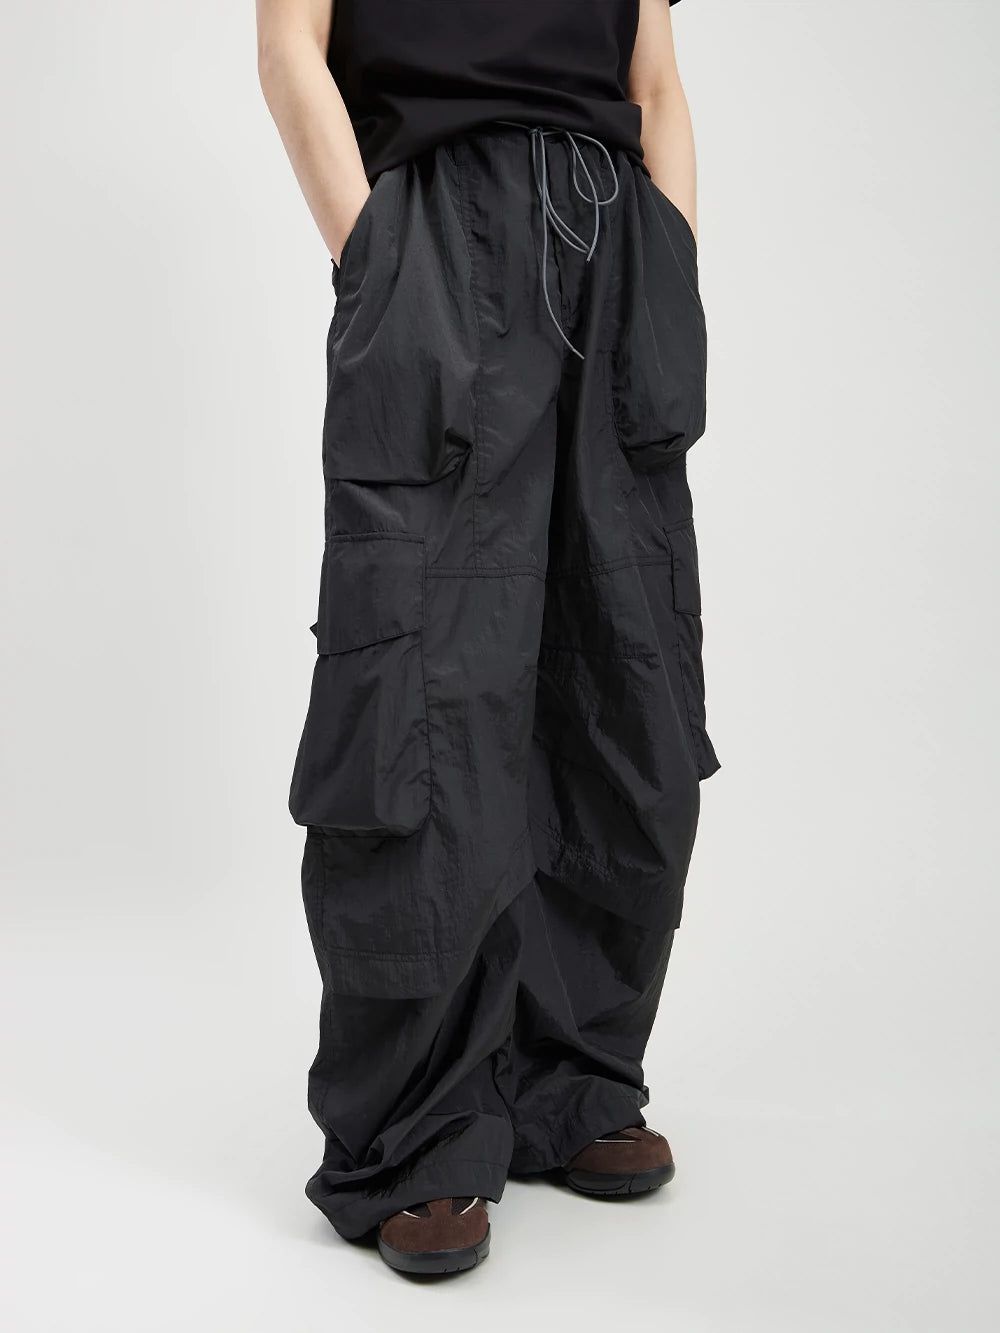 Casual Cargo Style Track Pants Korean Street Fashion Pants By Opicloth Shop Online at OH Vault